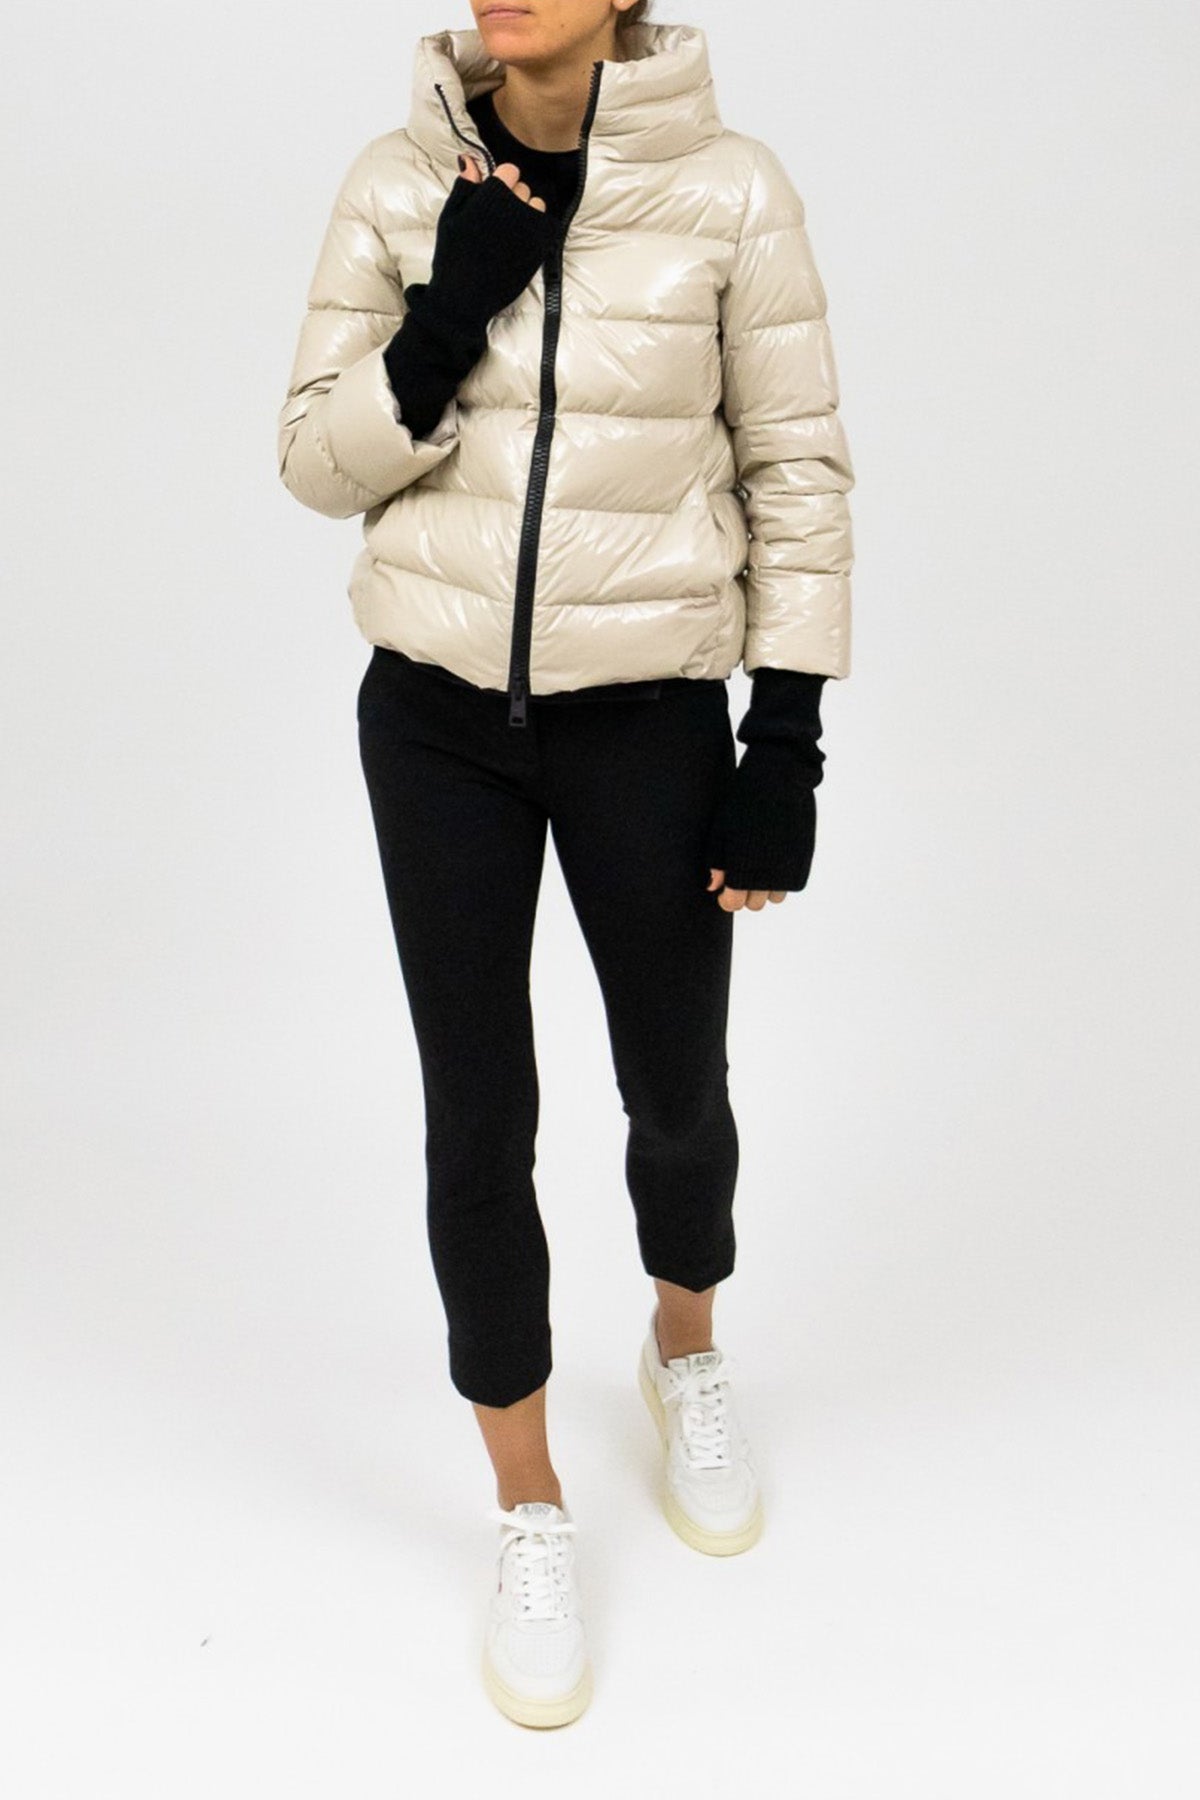 Herno Parlak Puffer Mont-Libas Trendy Fashion Store